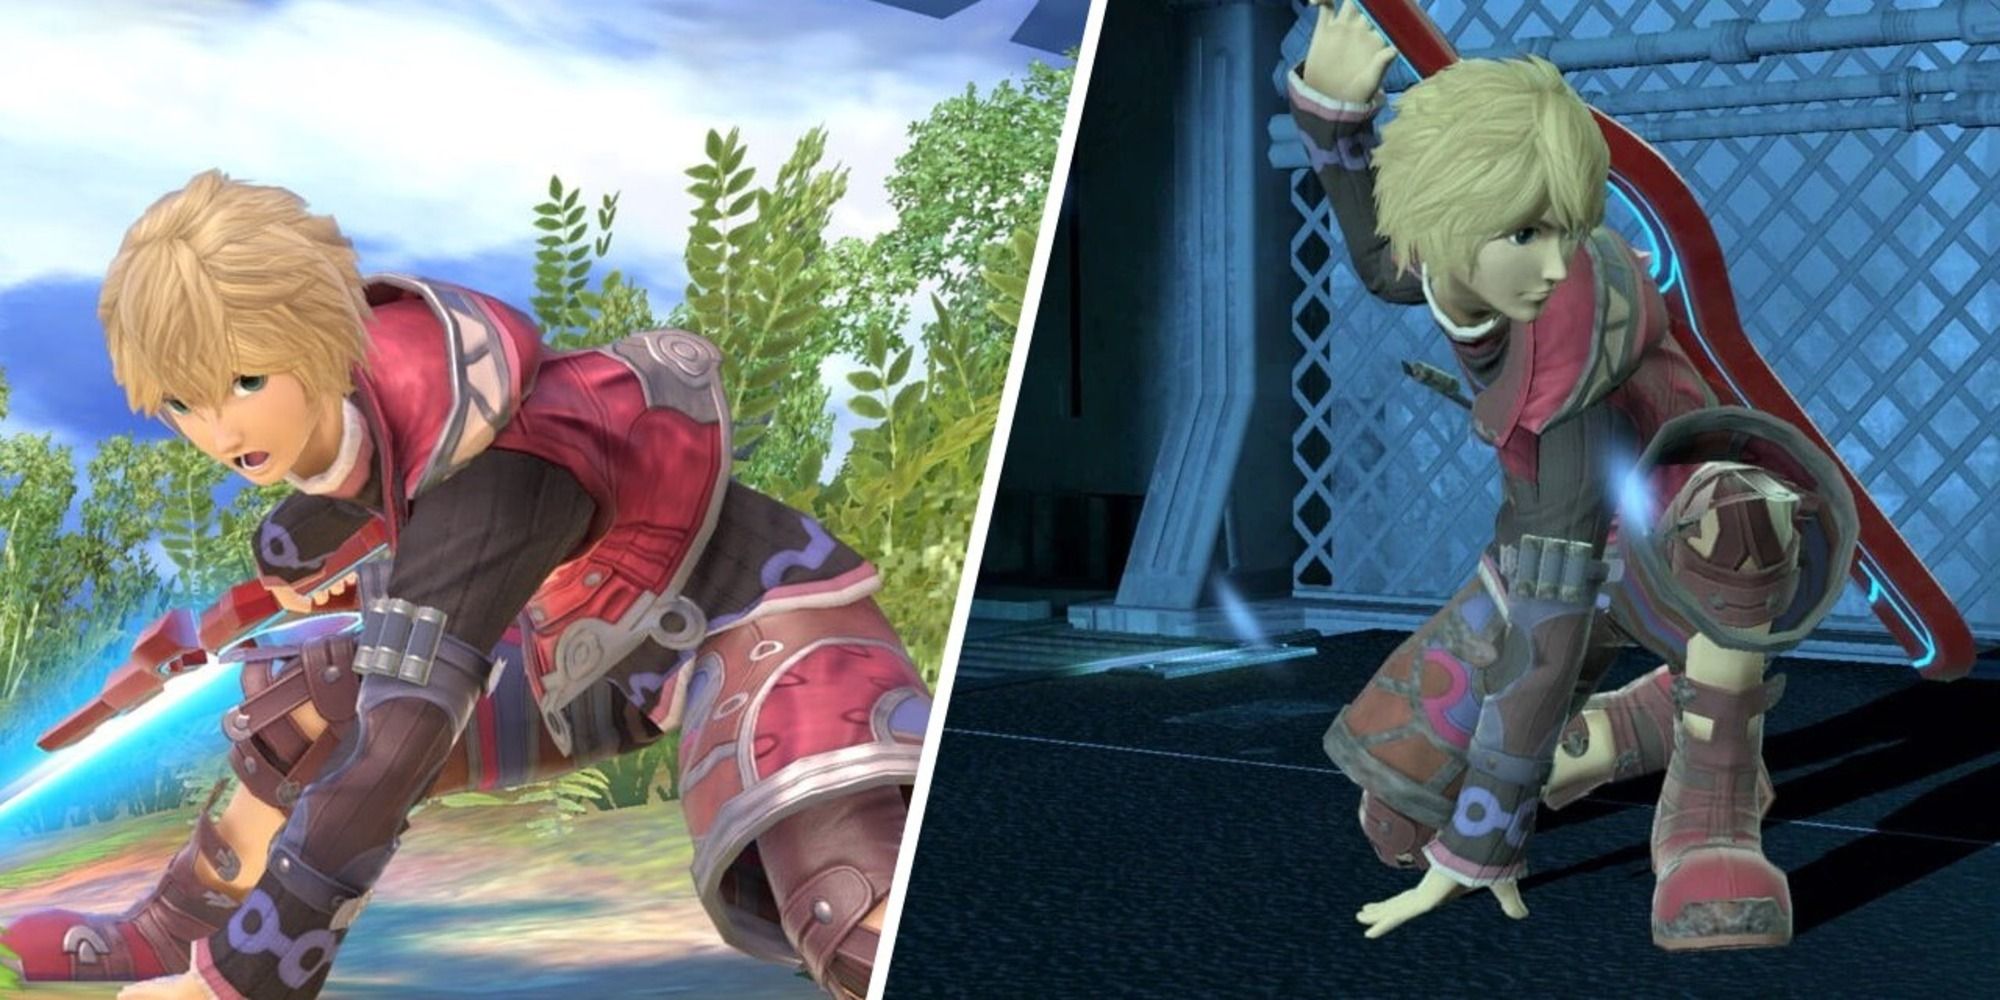 Shulk using his Down-Smash and crouching in Super Smash Bros. Ultimate.